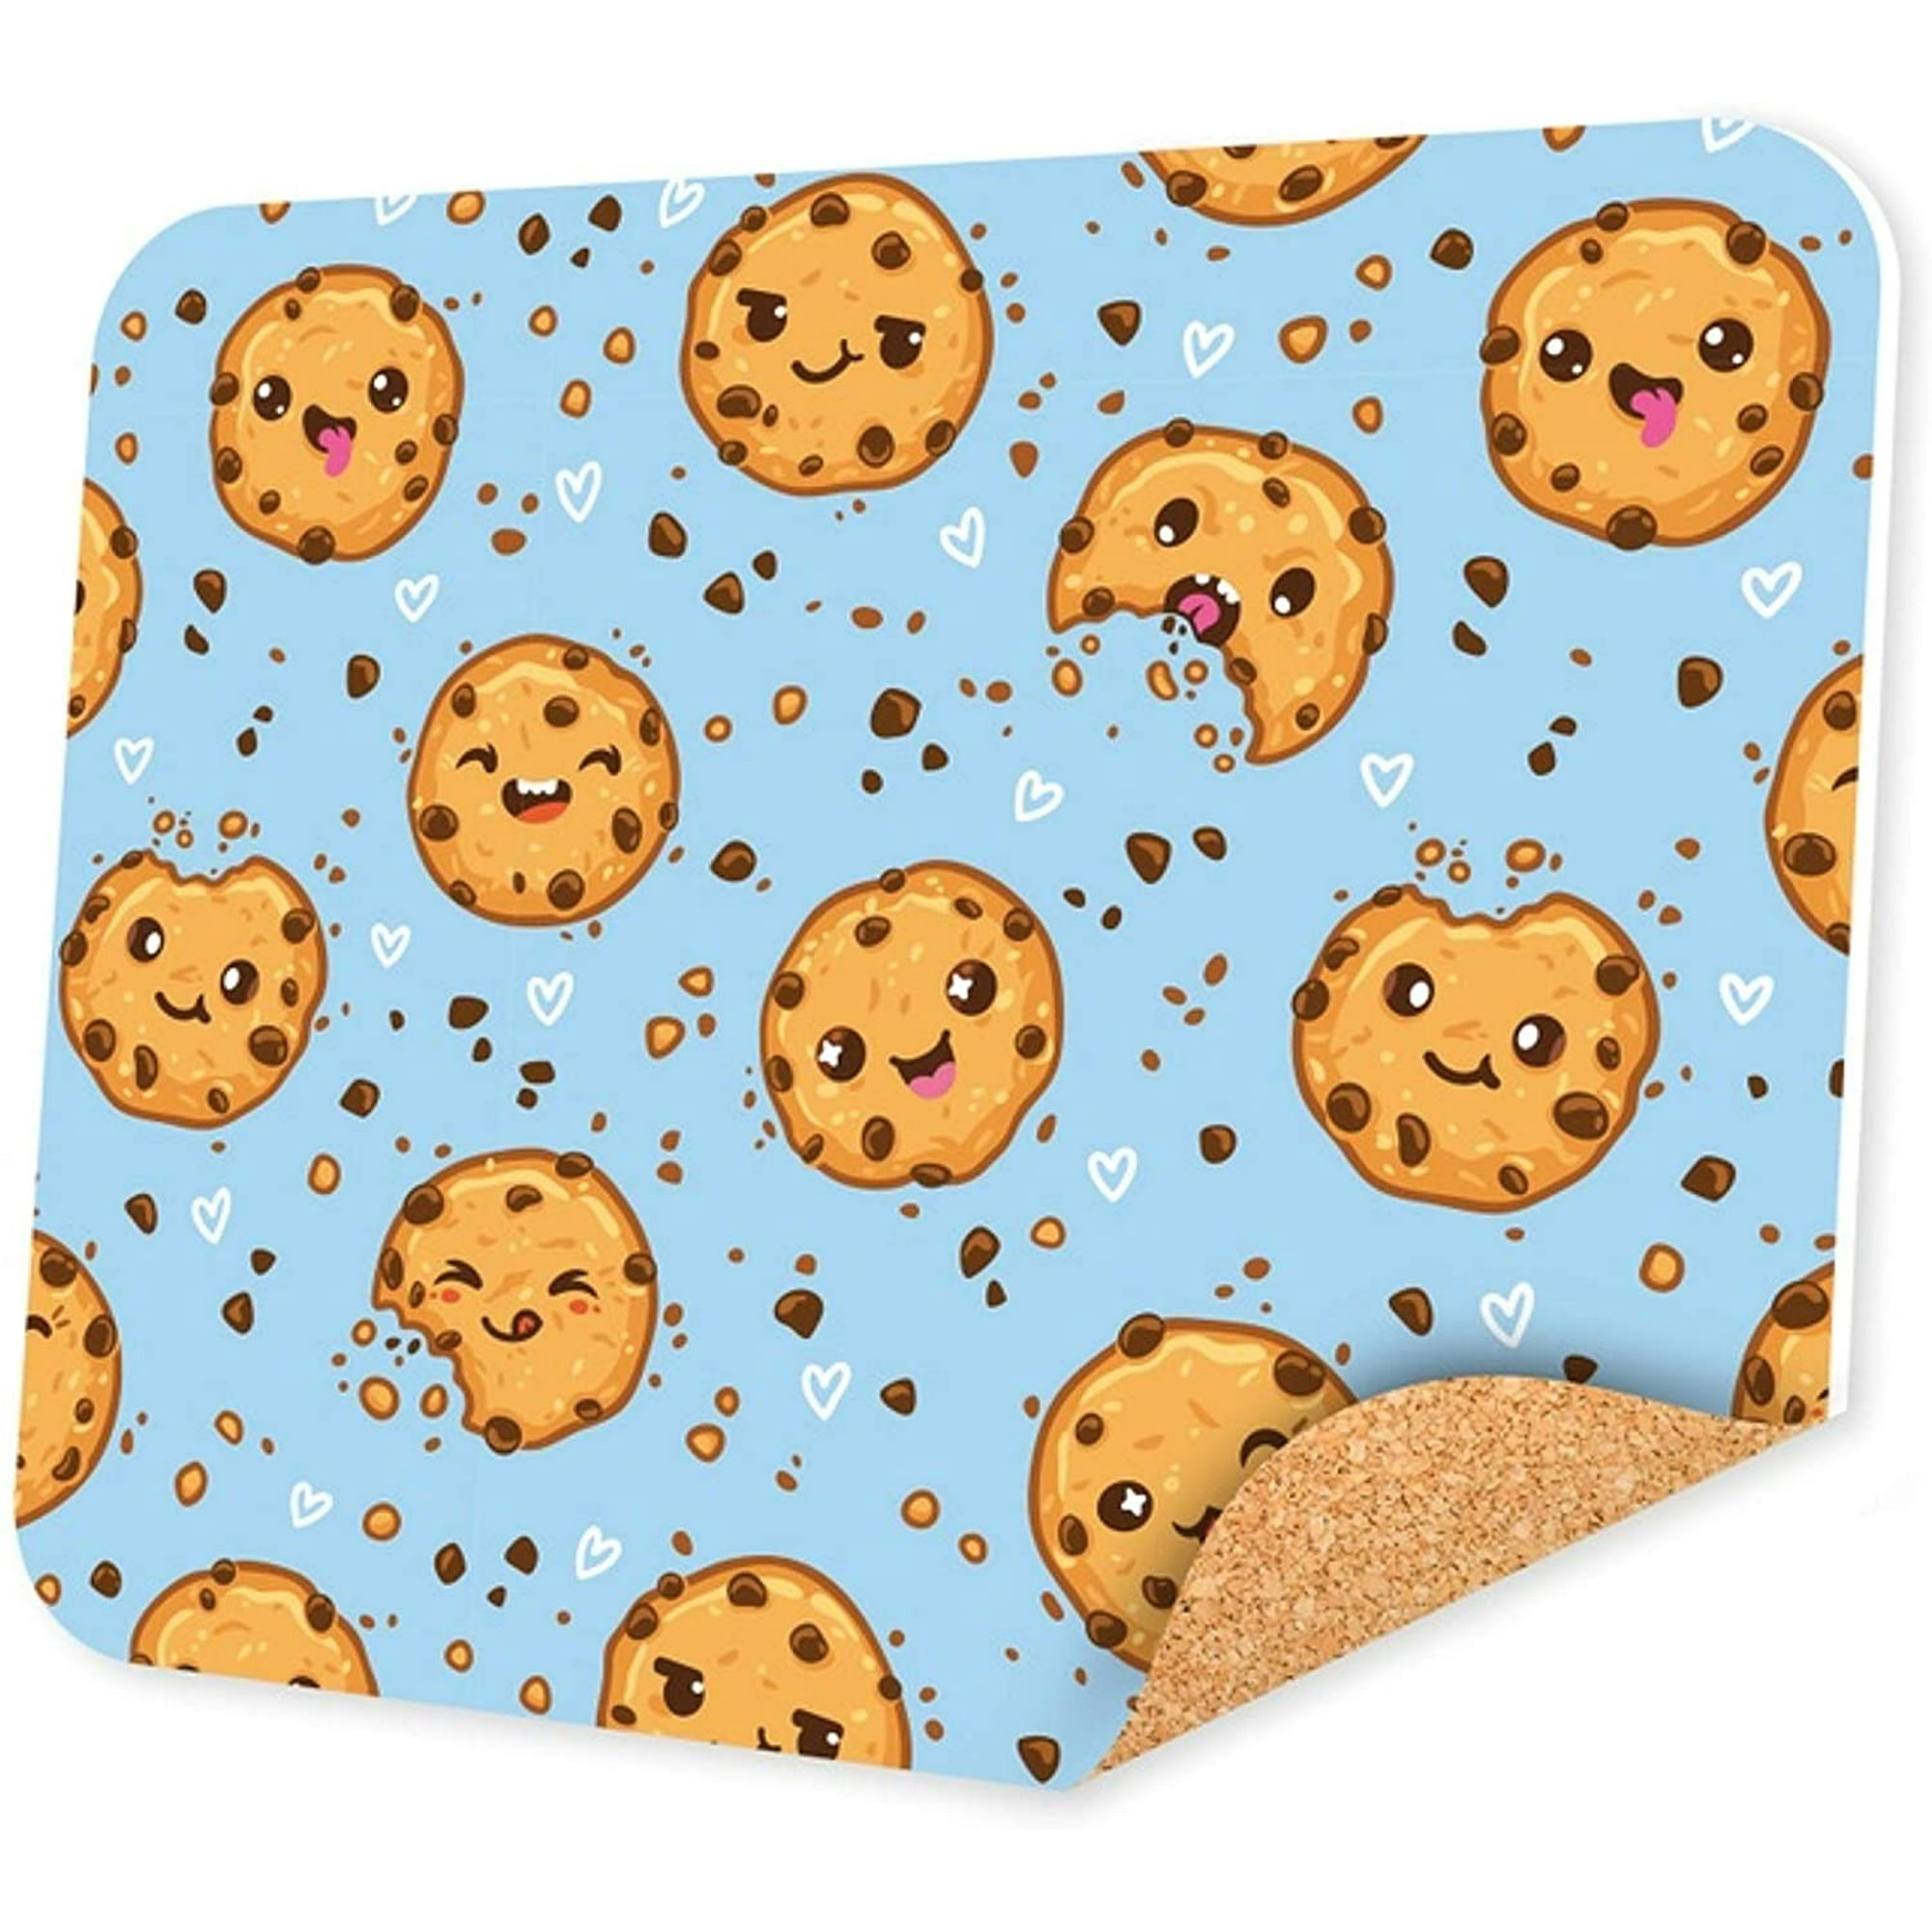 Cute Cookie Love Mouse Pad - Computer Gaming Laptop Desk Pad for Girls Boys  Kids, Eco-Friendly Non-Slip Waterproof Cork | Walmart Canada